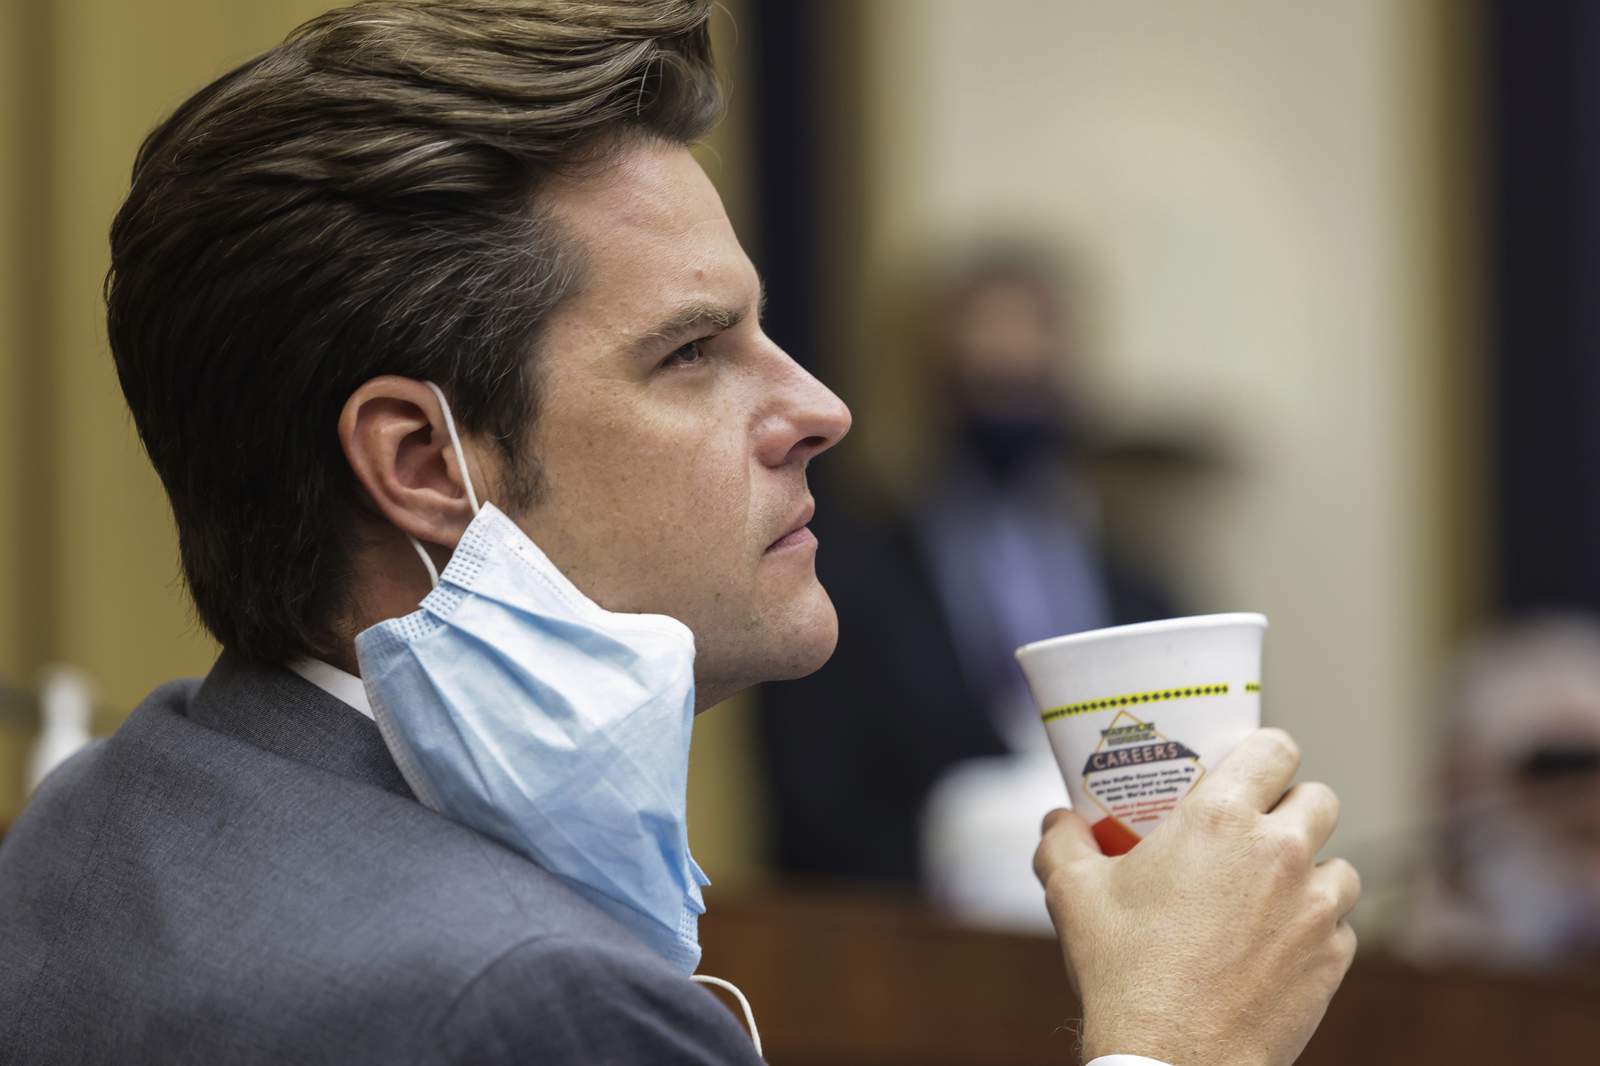 House ethics: Gaetz broke rules, not law, with Cohen tweet